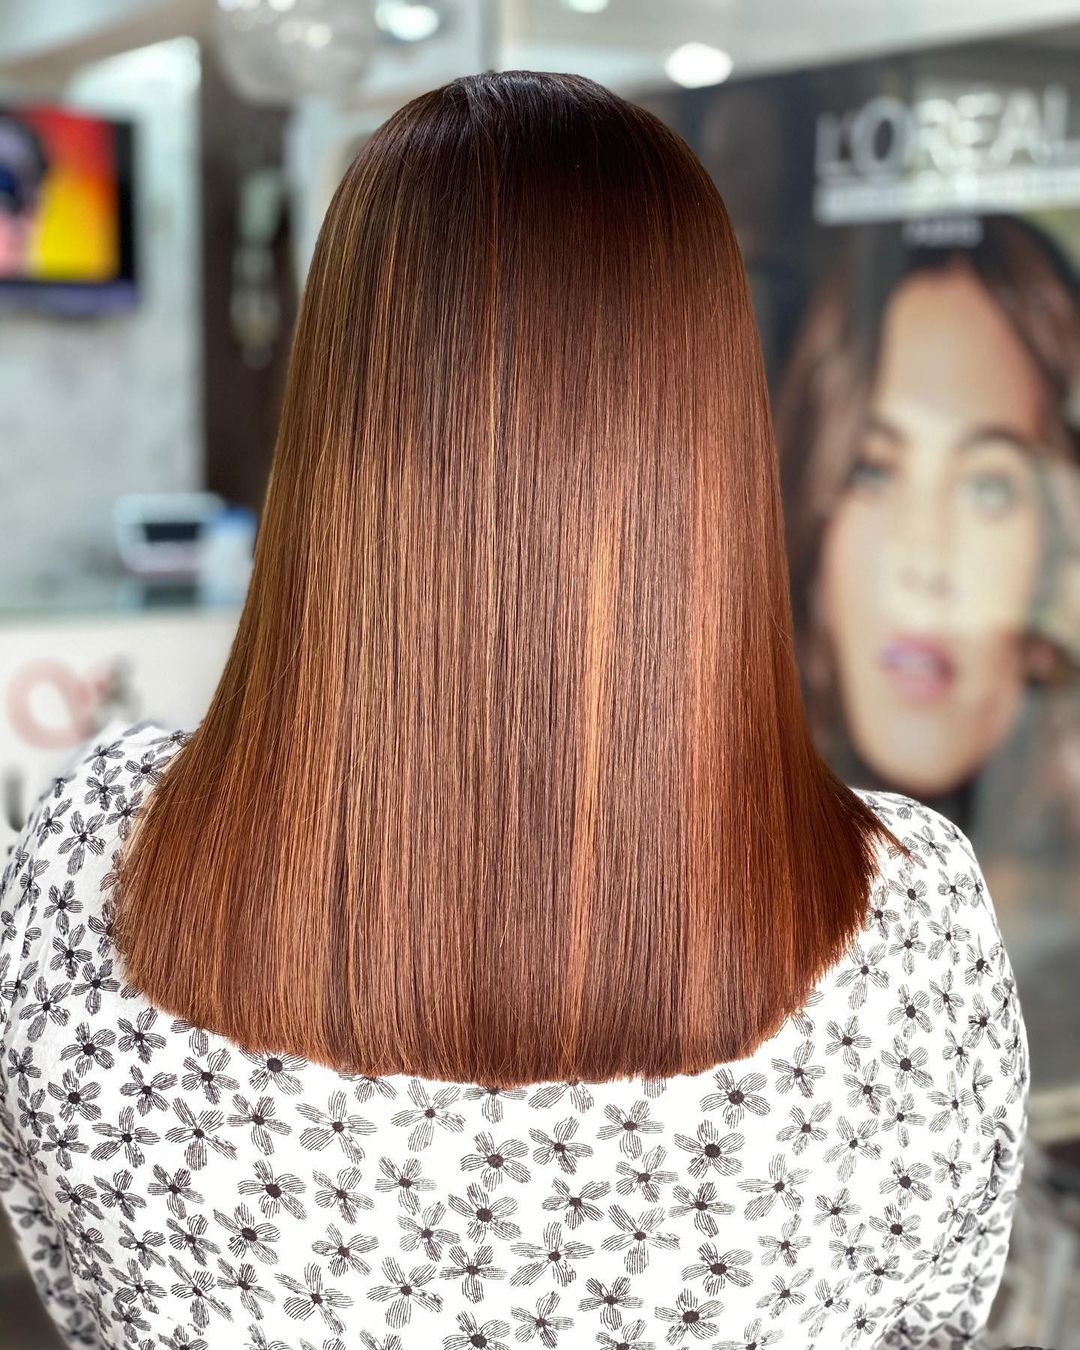 25 Most Popular Balayage Brown Hair Colors Right Now